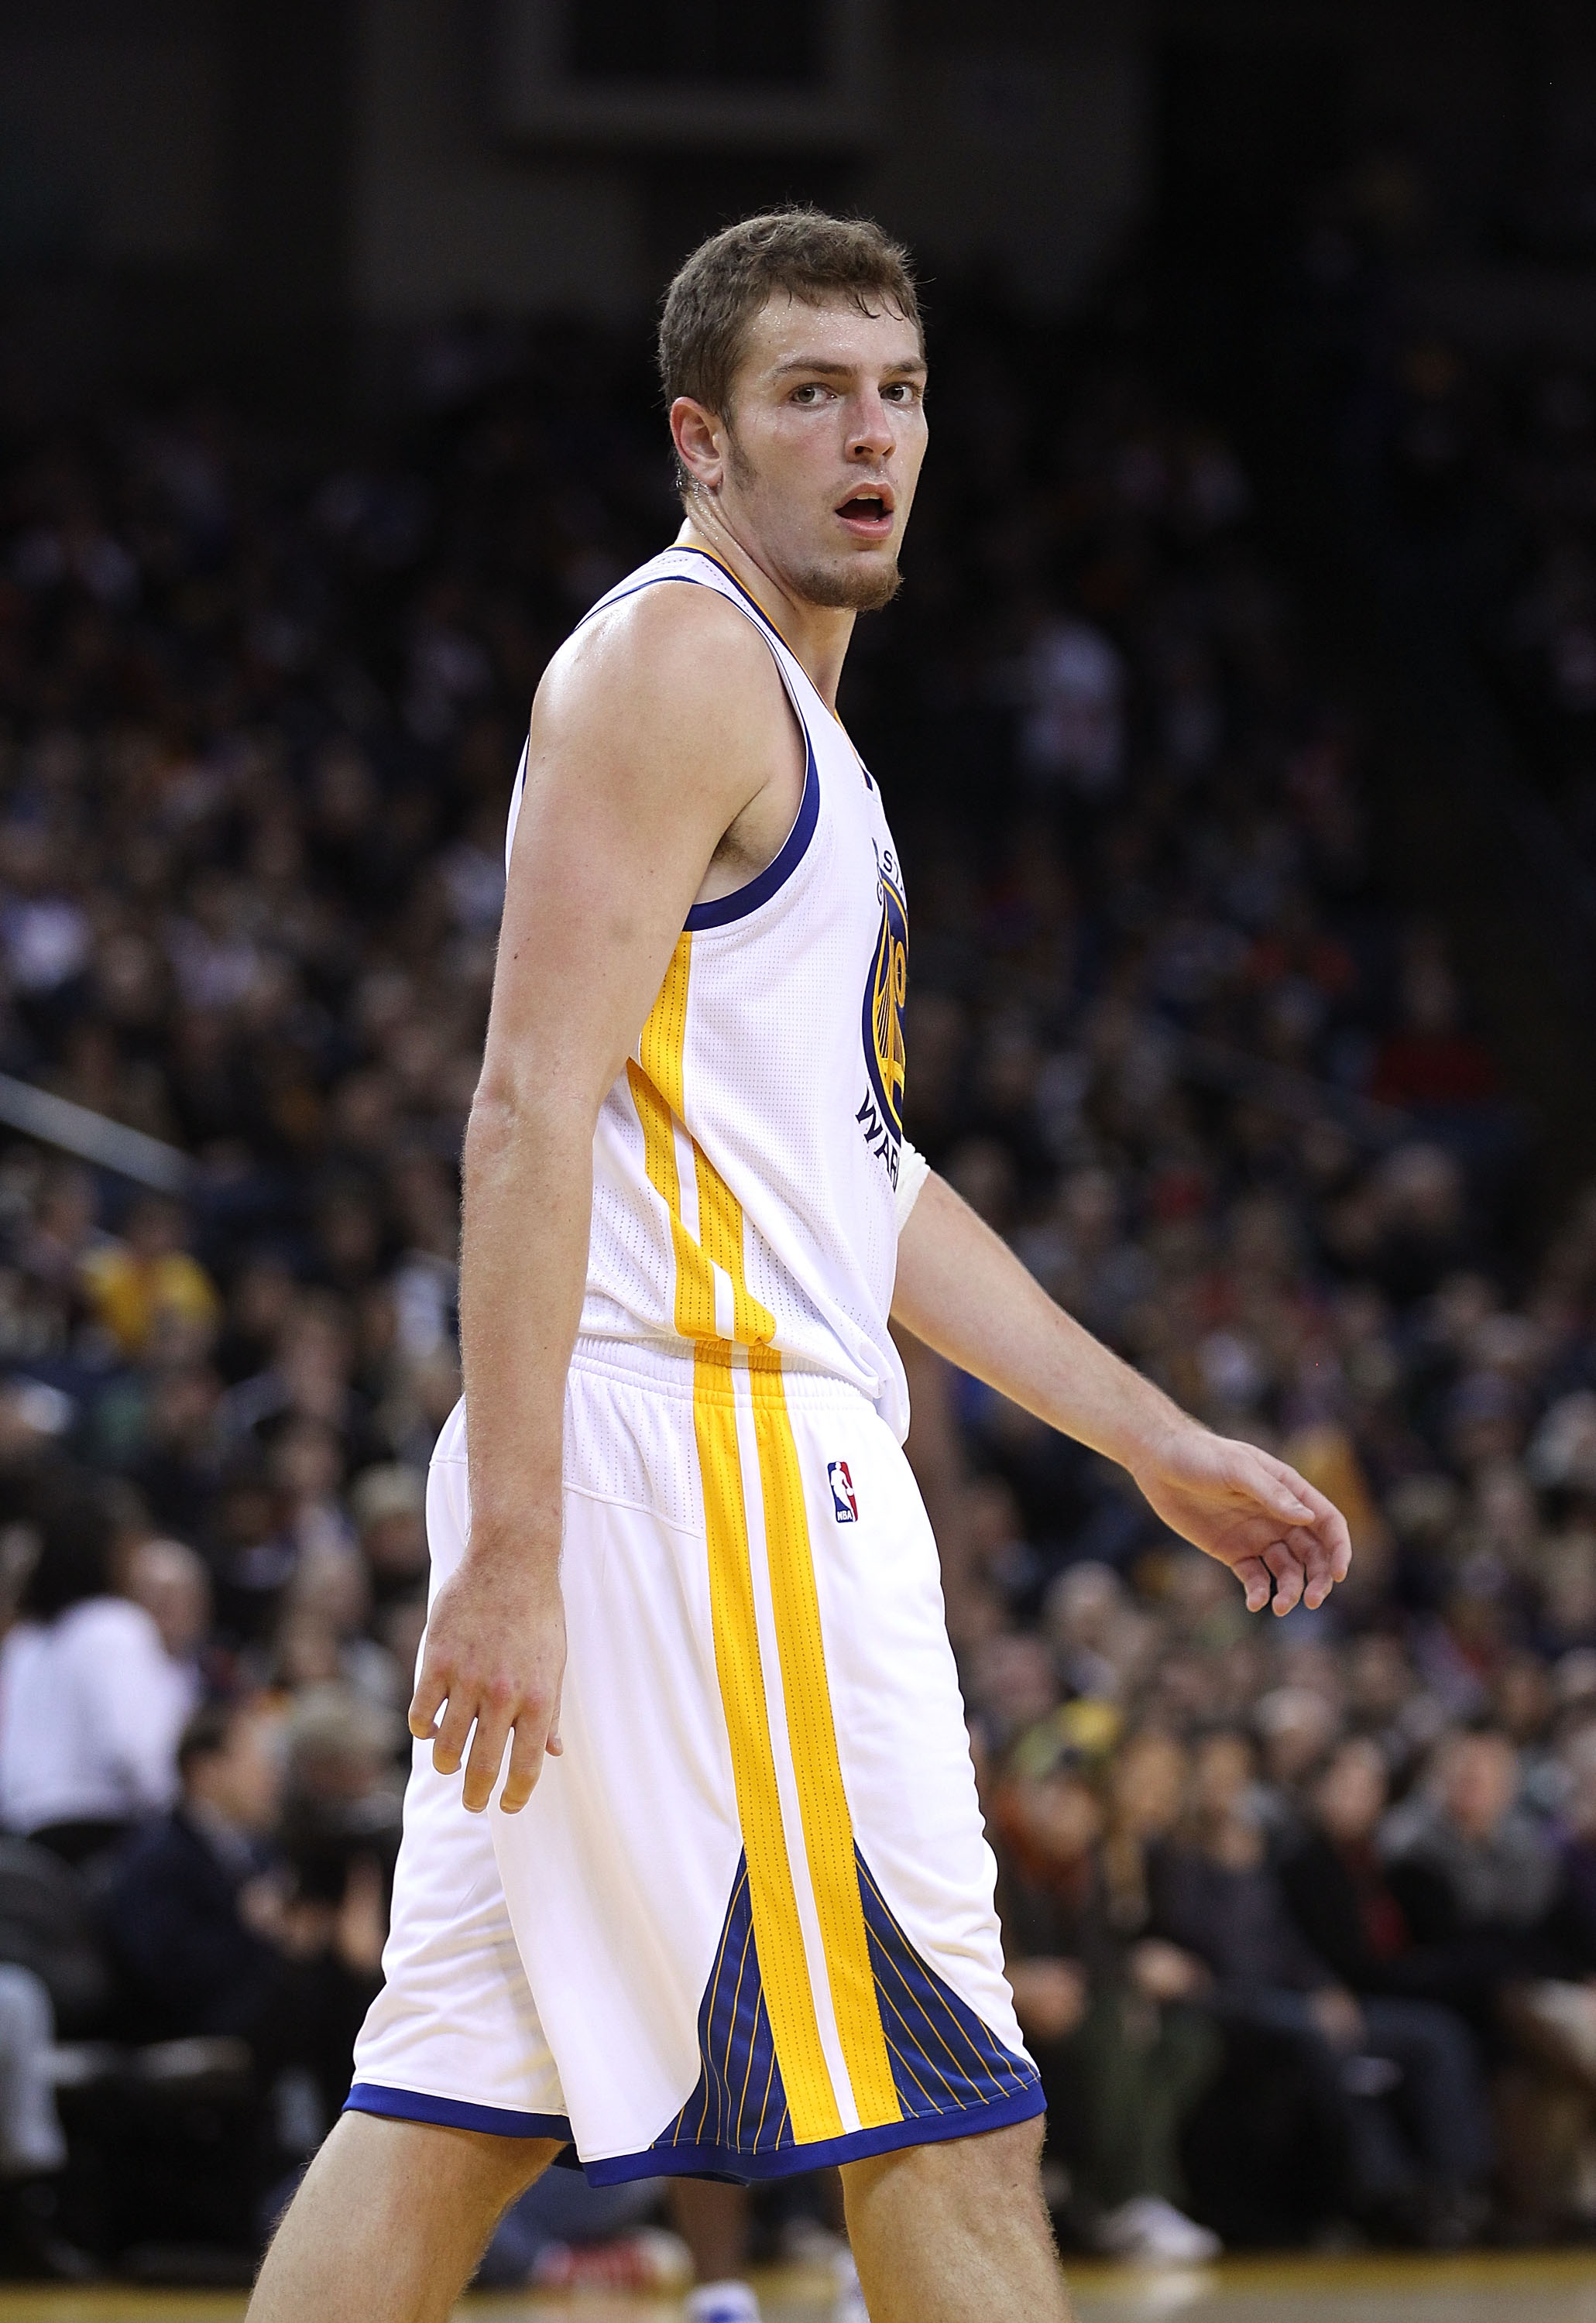 OAKLAND, CA - DECEMBER 20:  David Lee #10 of the Golden State Warriors in action against the Houston Rockets at Oracle Arena on December 20, 2010 in Oakland, California. NOTE TO USER: User expressly acknowledges and agrees that, by downloading and or usin